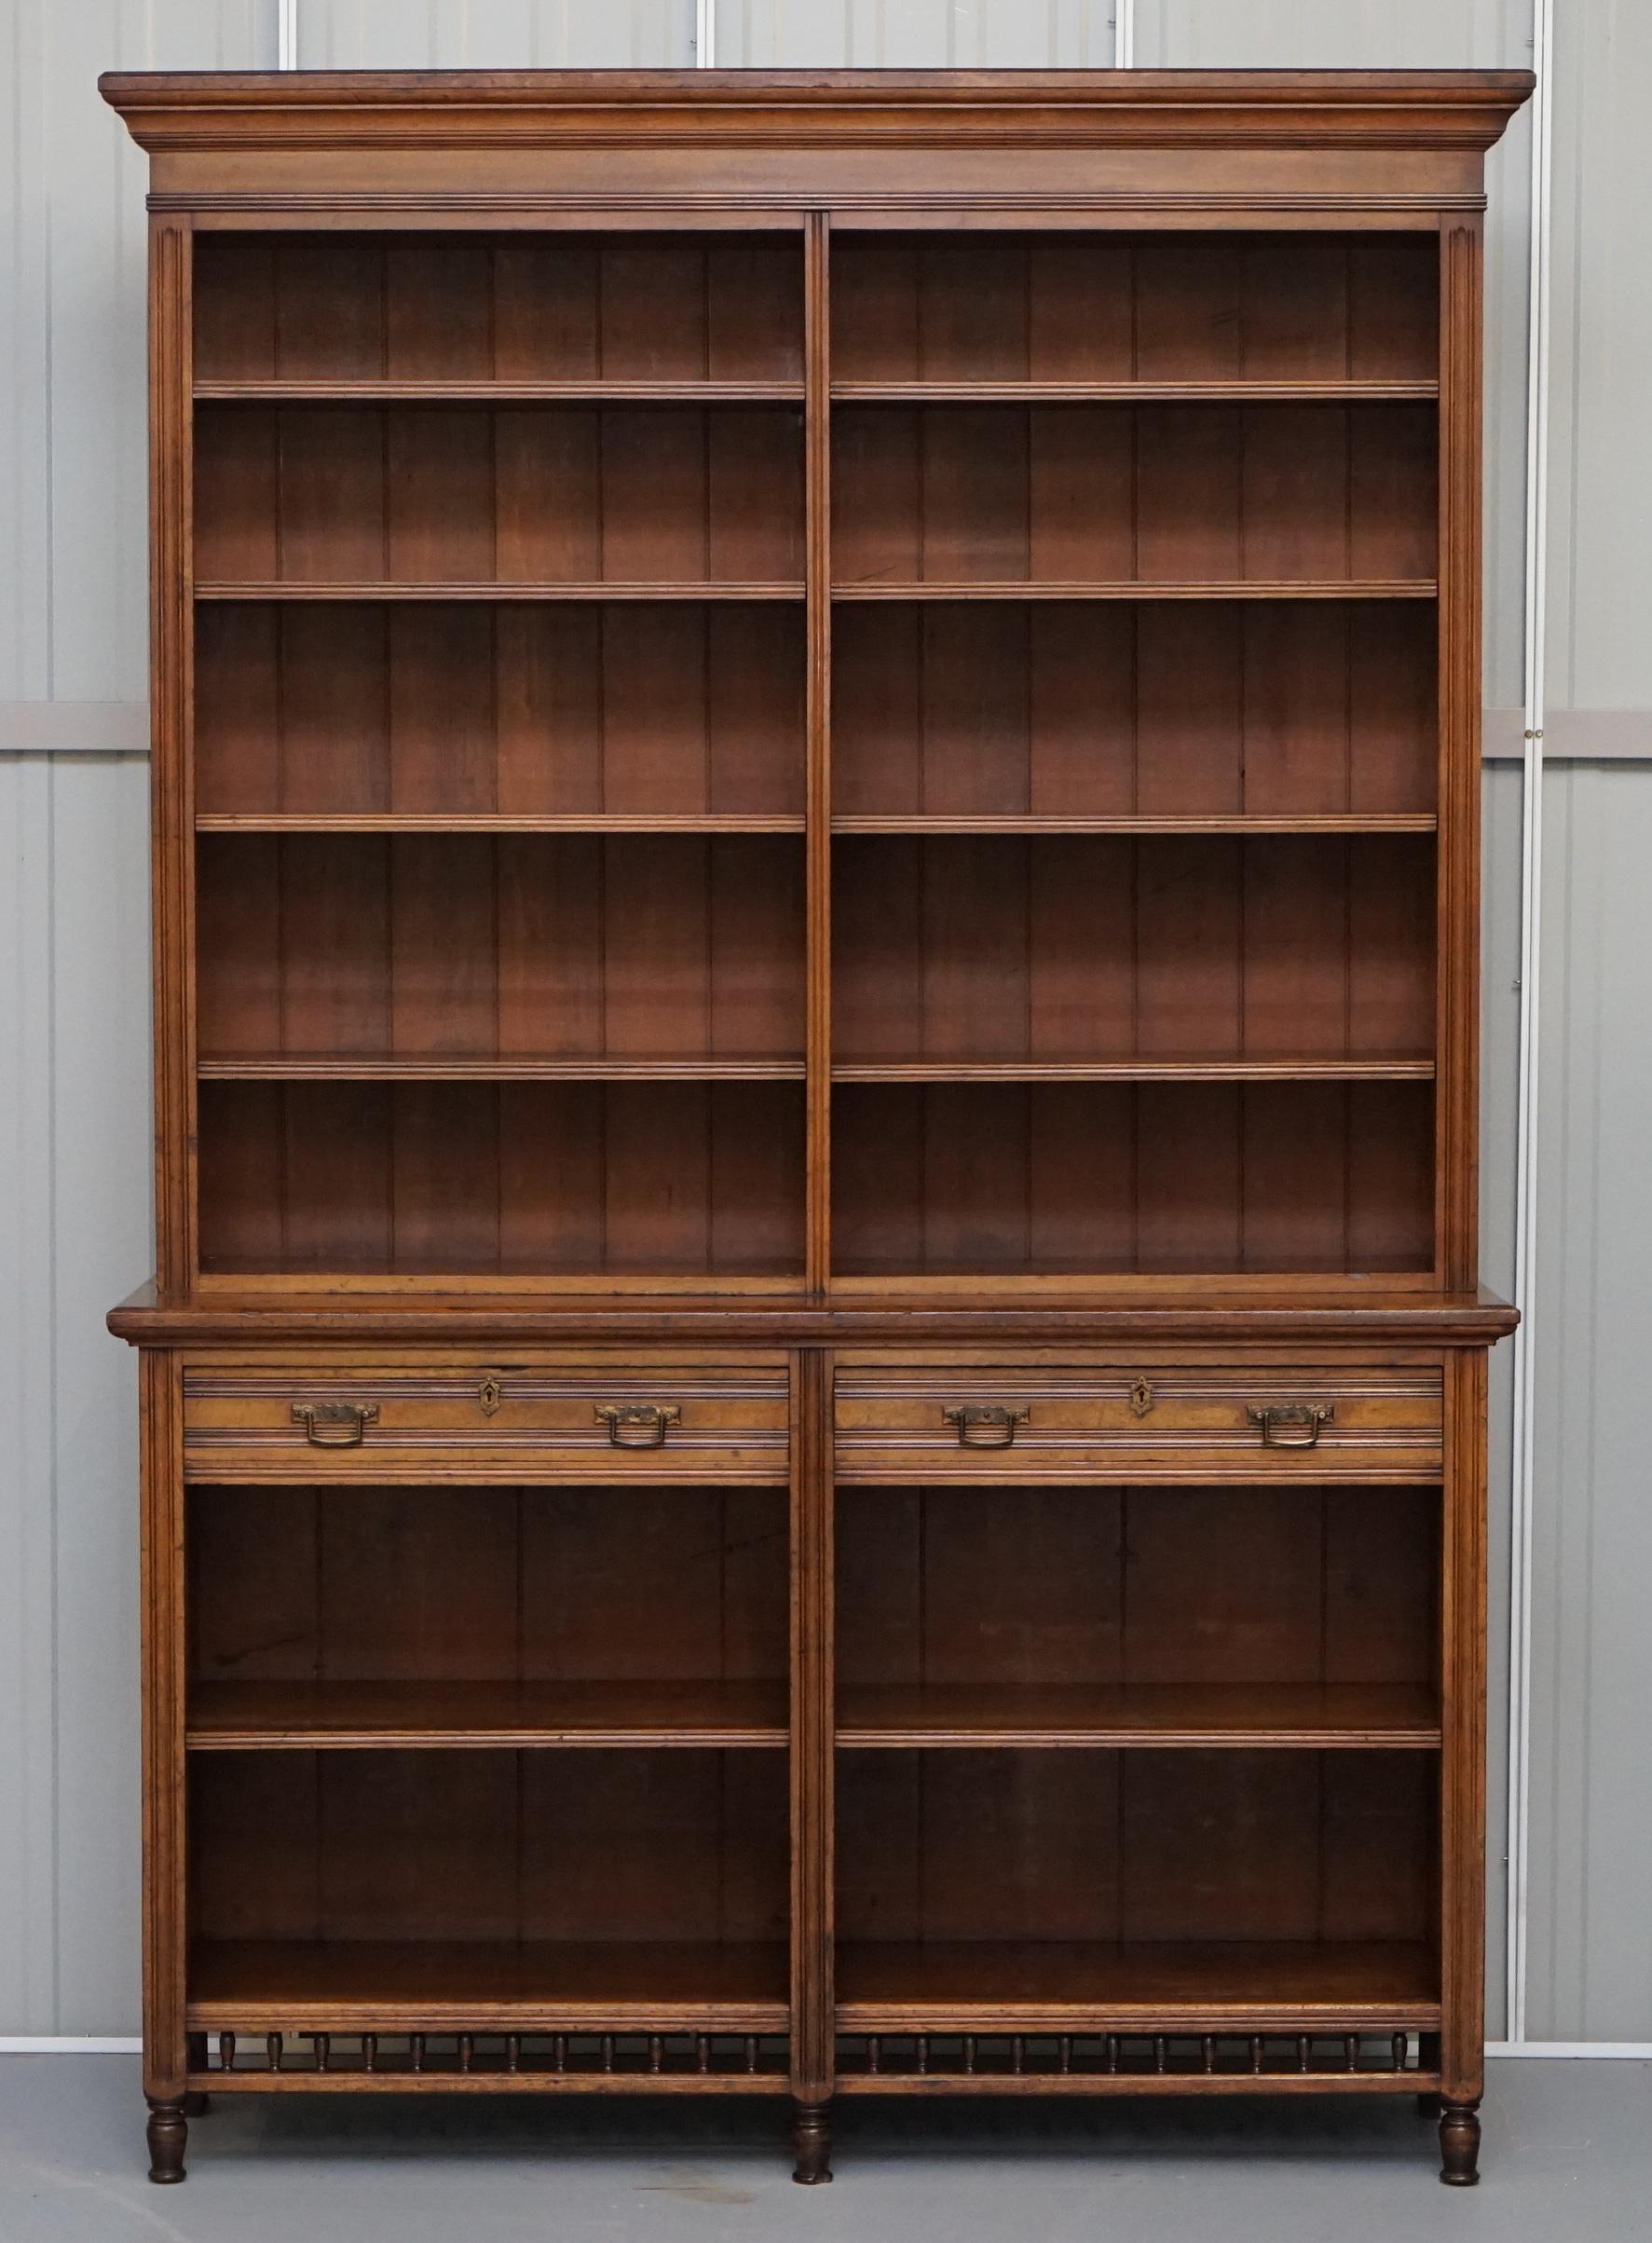 Wimbledon-Furniture

Wimbledon-Furniture is delighted to offer for sale lovely solid English oak Maple & Co stamped Library bookcase with height adjustable shelves

Please note the delivery fee listed is just a guide, it covers within the M25 only,